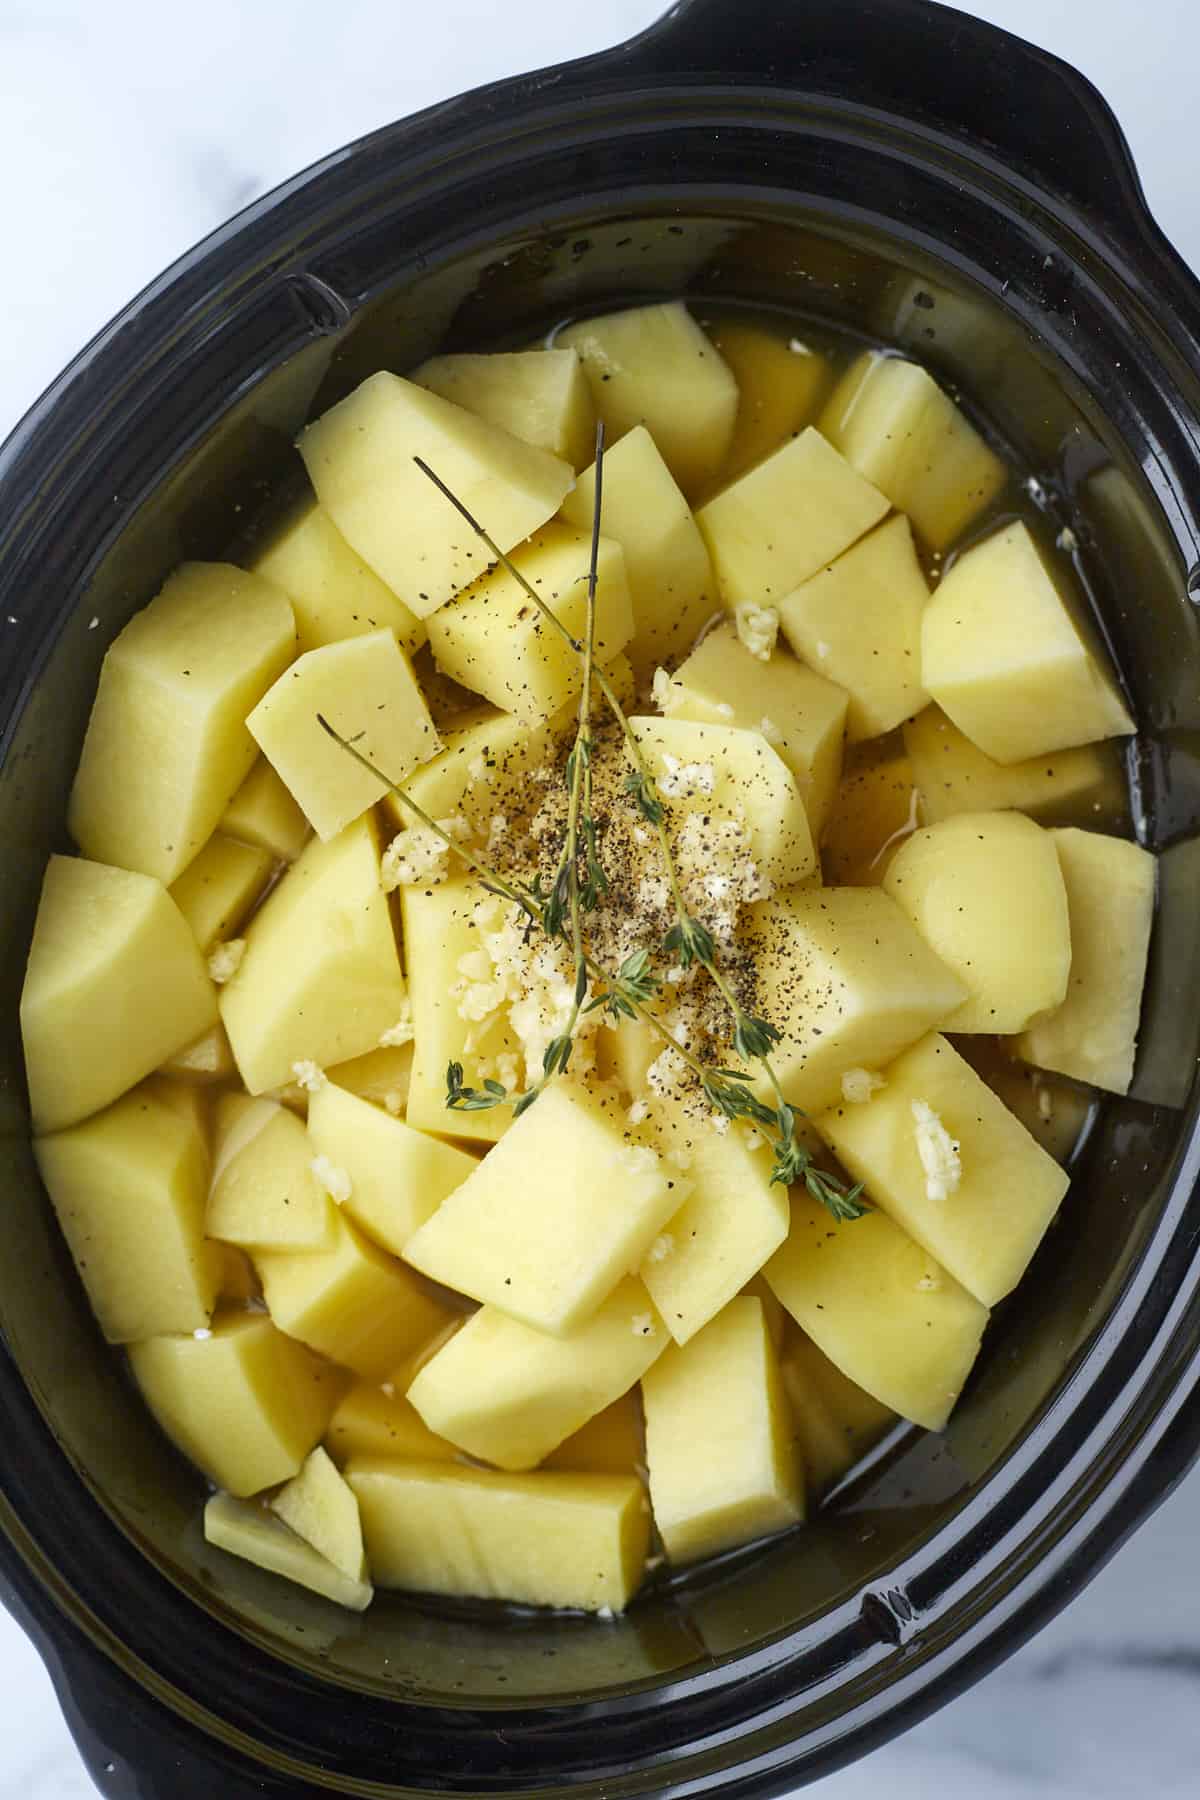 cubed potatoes in a slow cooker with vegetable broth, garlic, and herbs